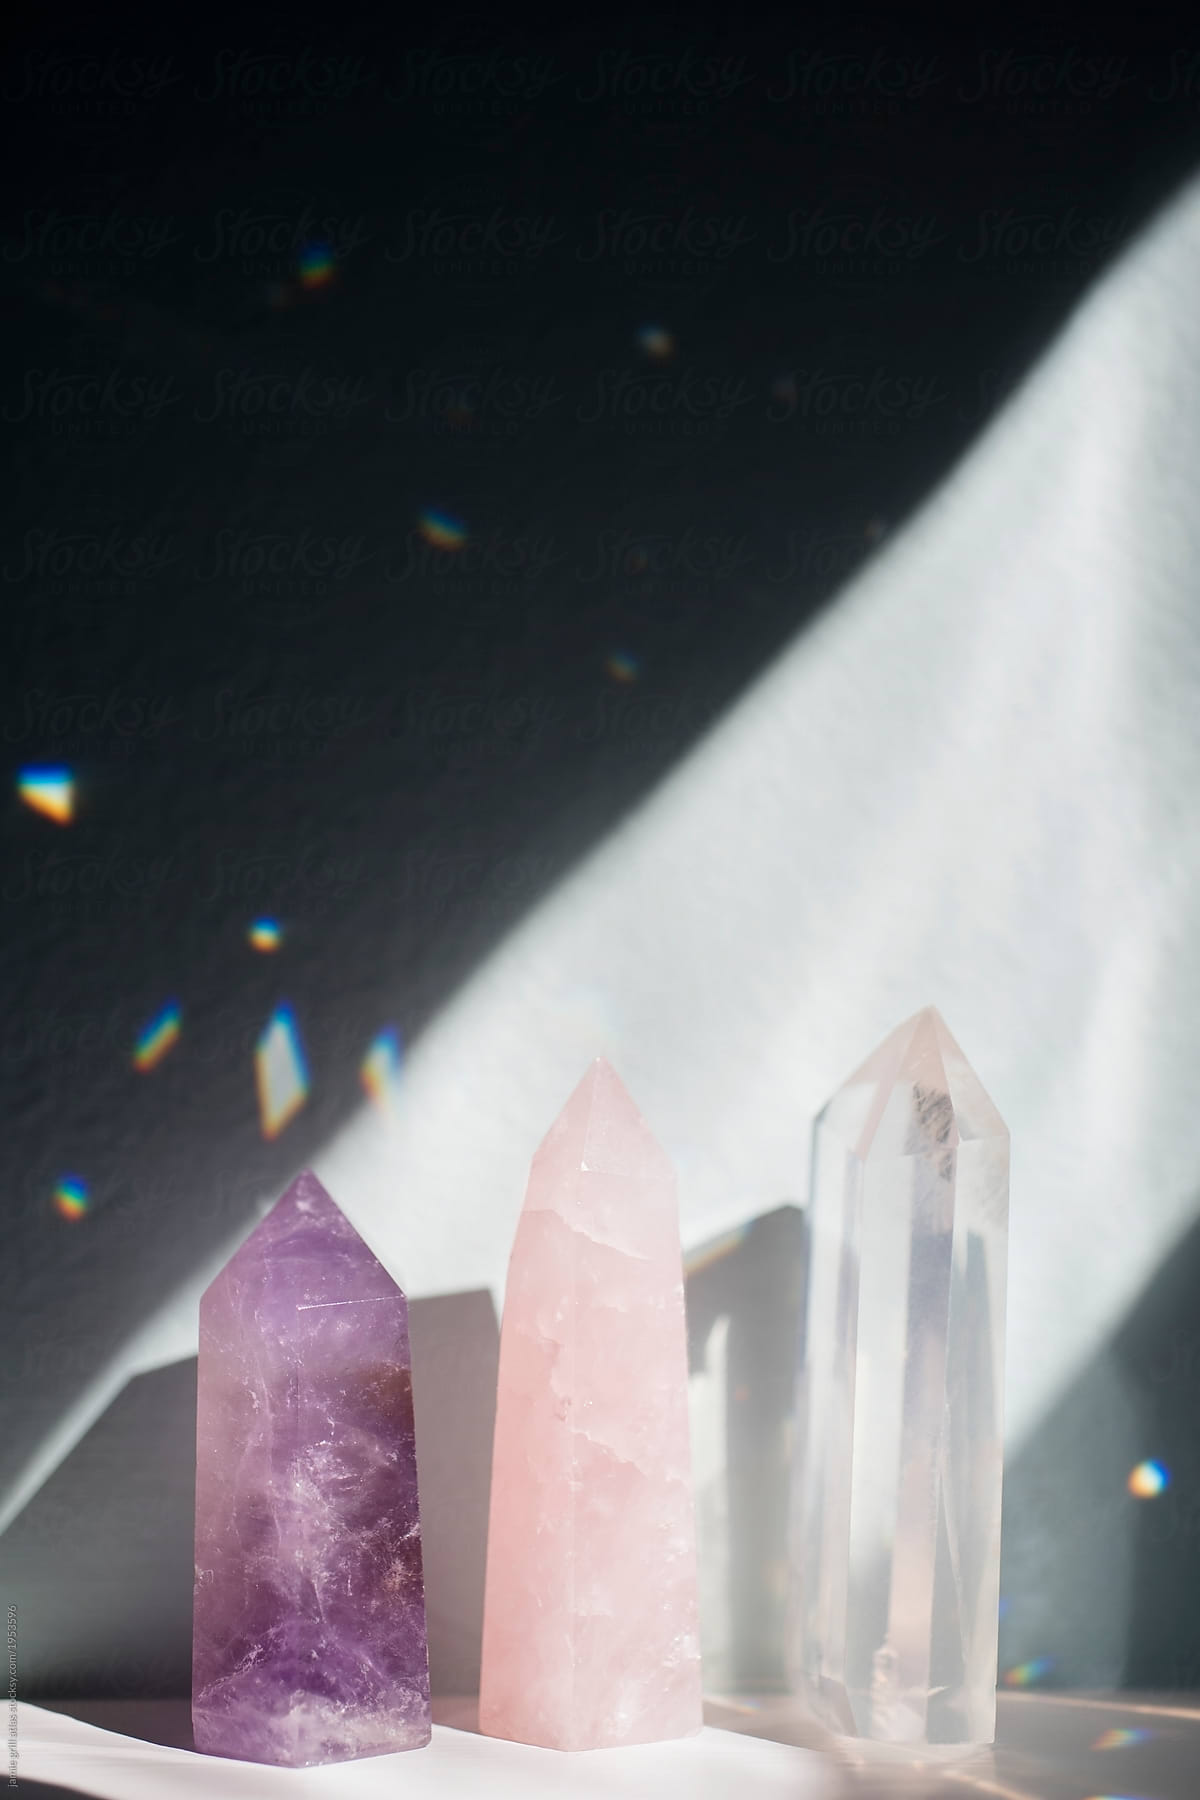 Crystals in beam of light creating rainbows